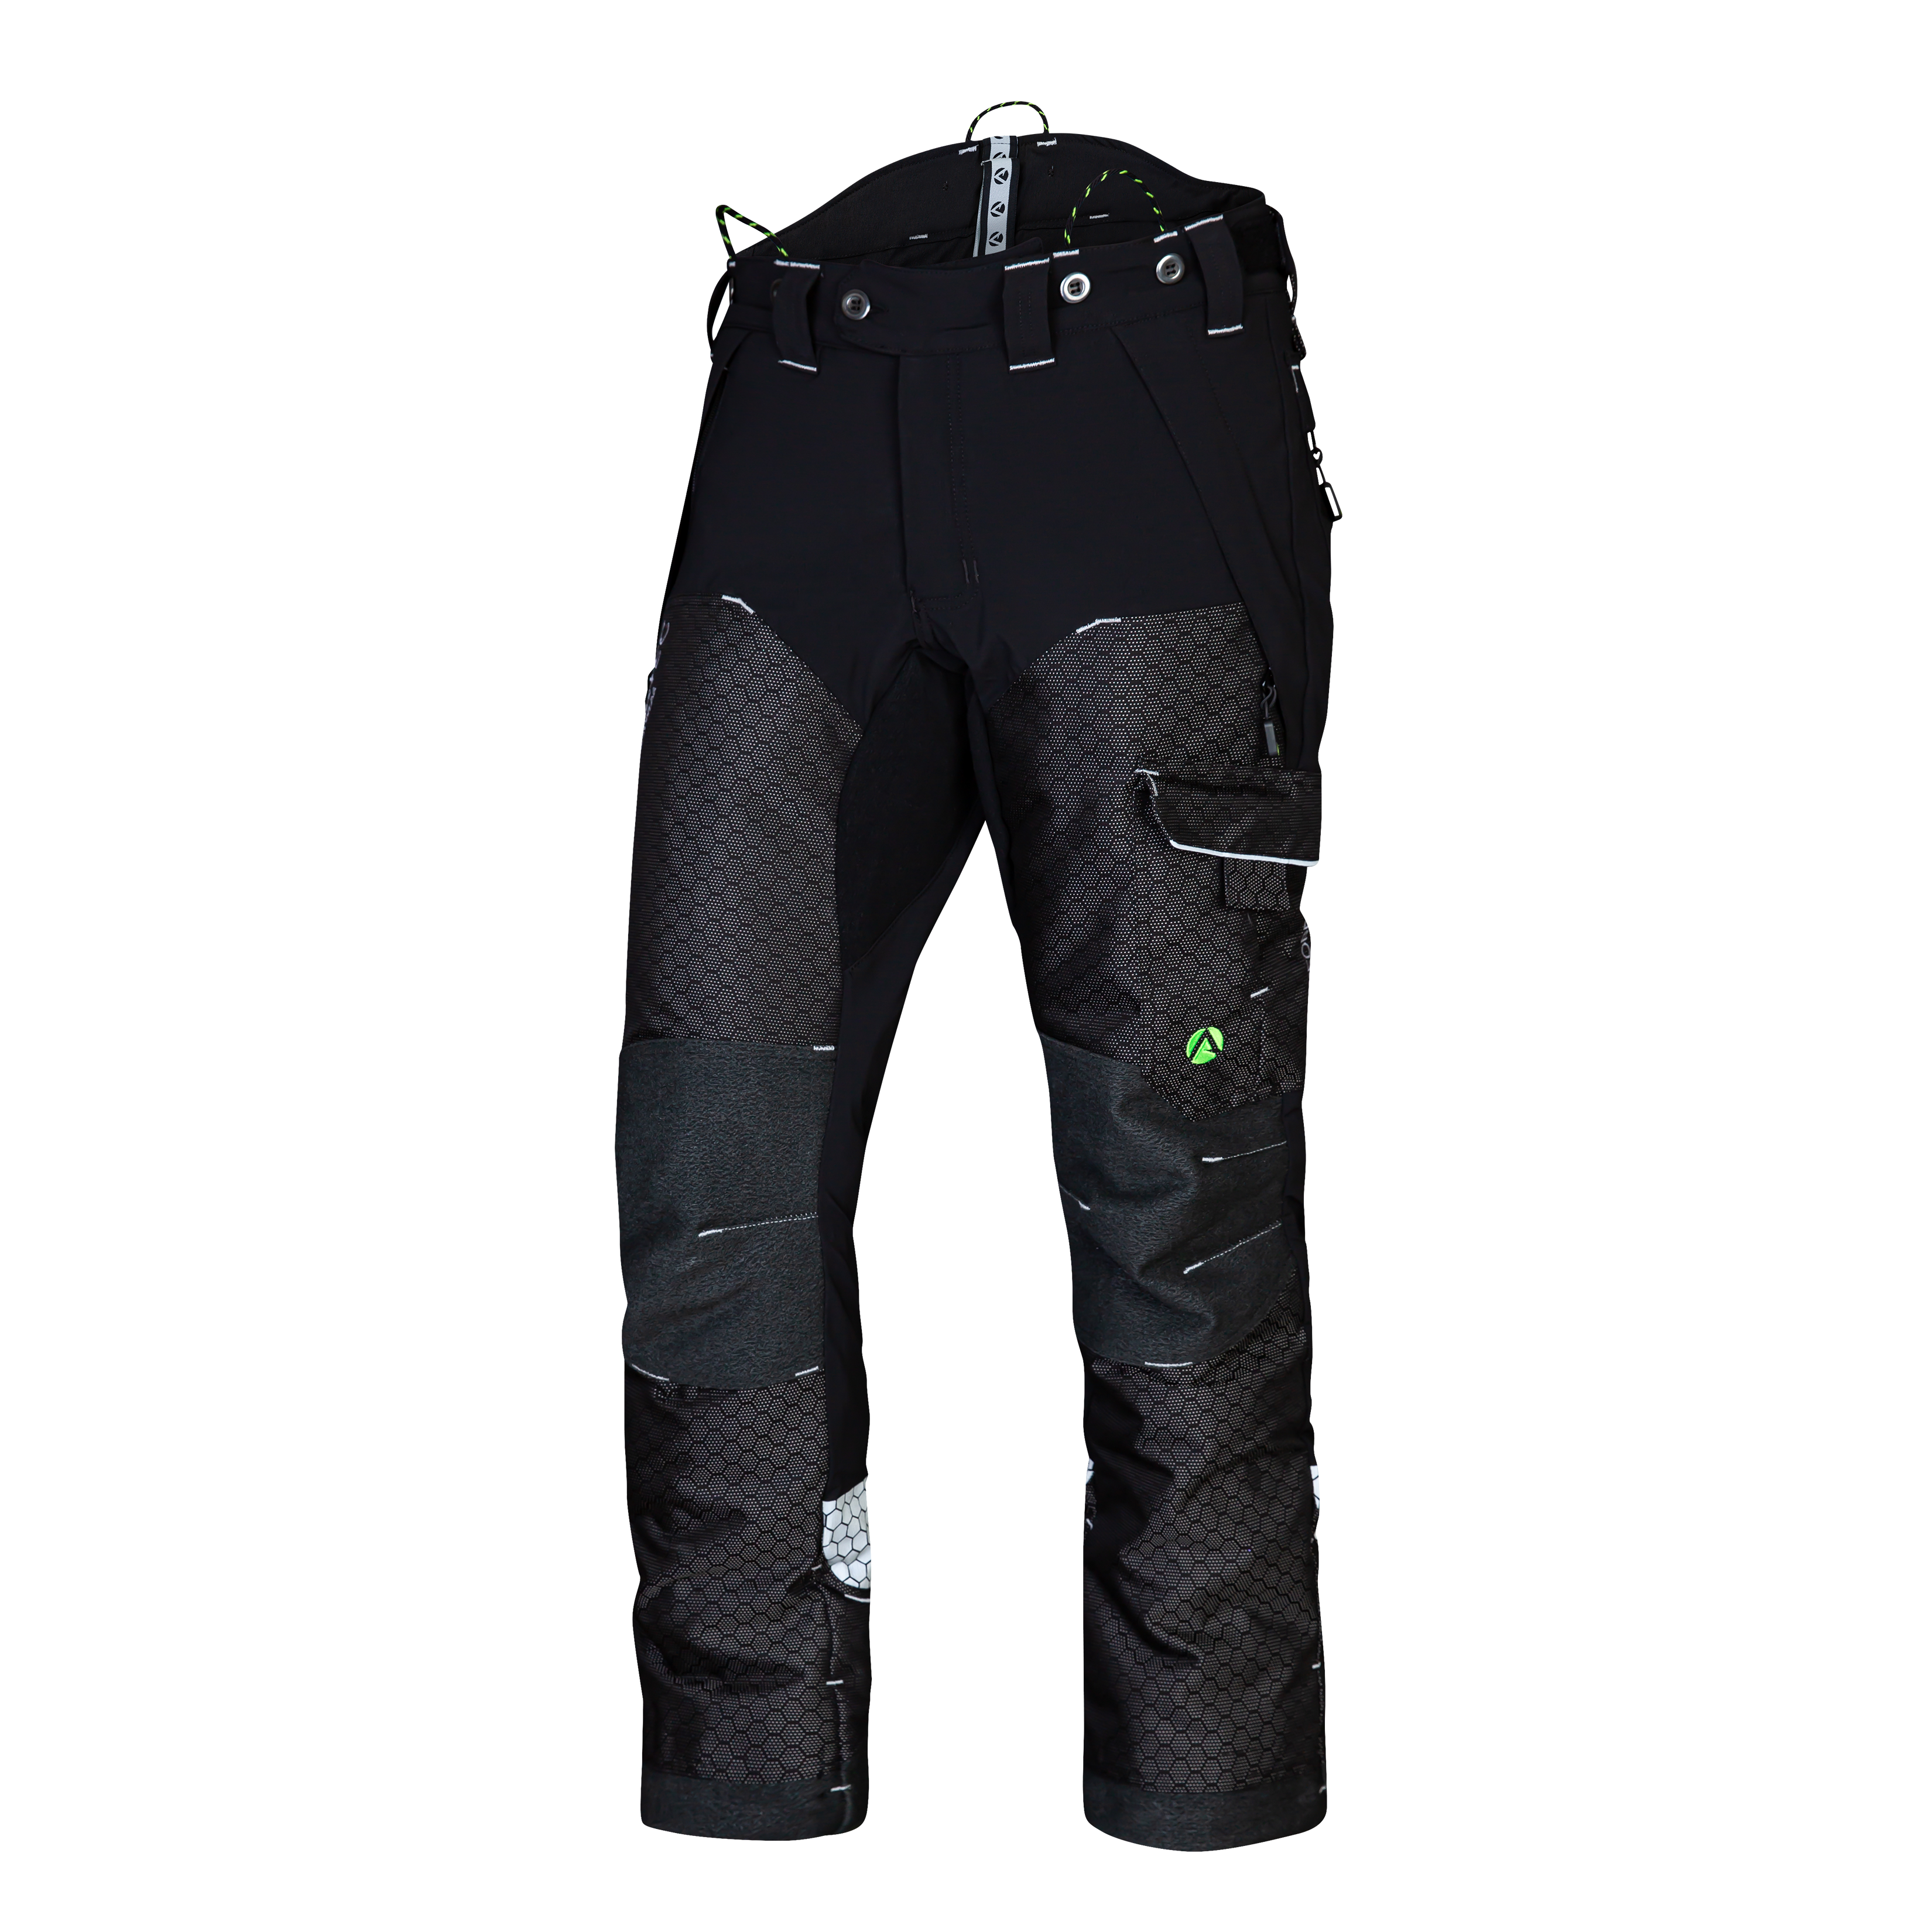 AT4080 - Arbortec Deep Forest Chainsaw Trousers Design A/Class 1 - Black